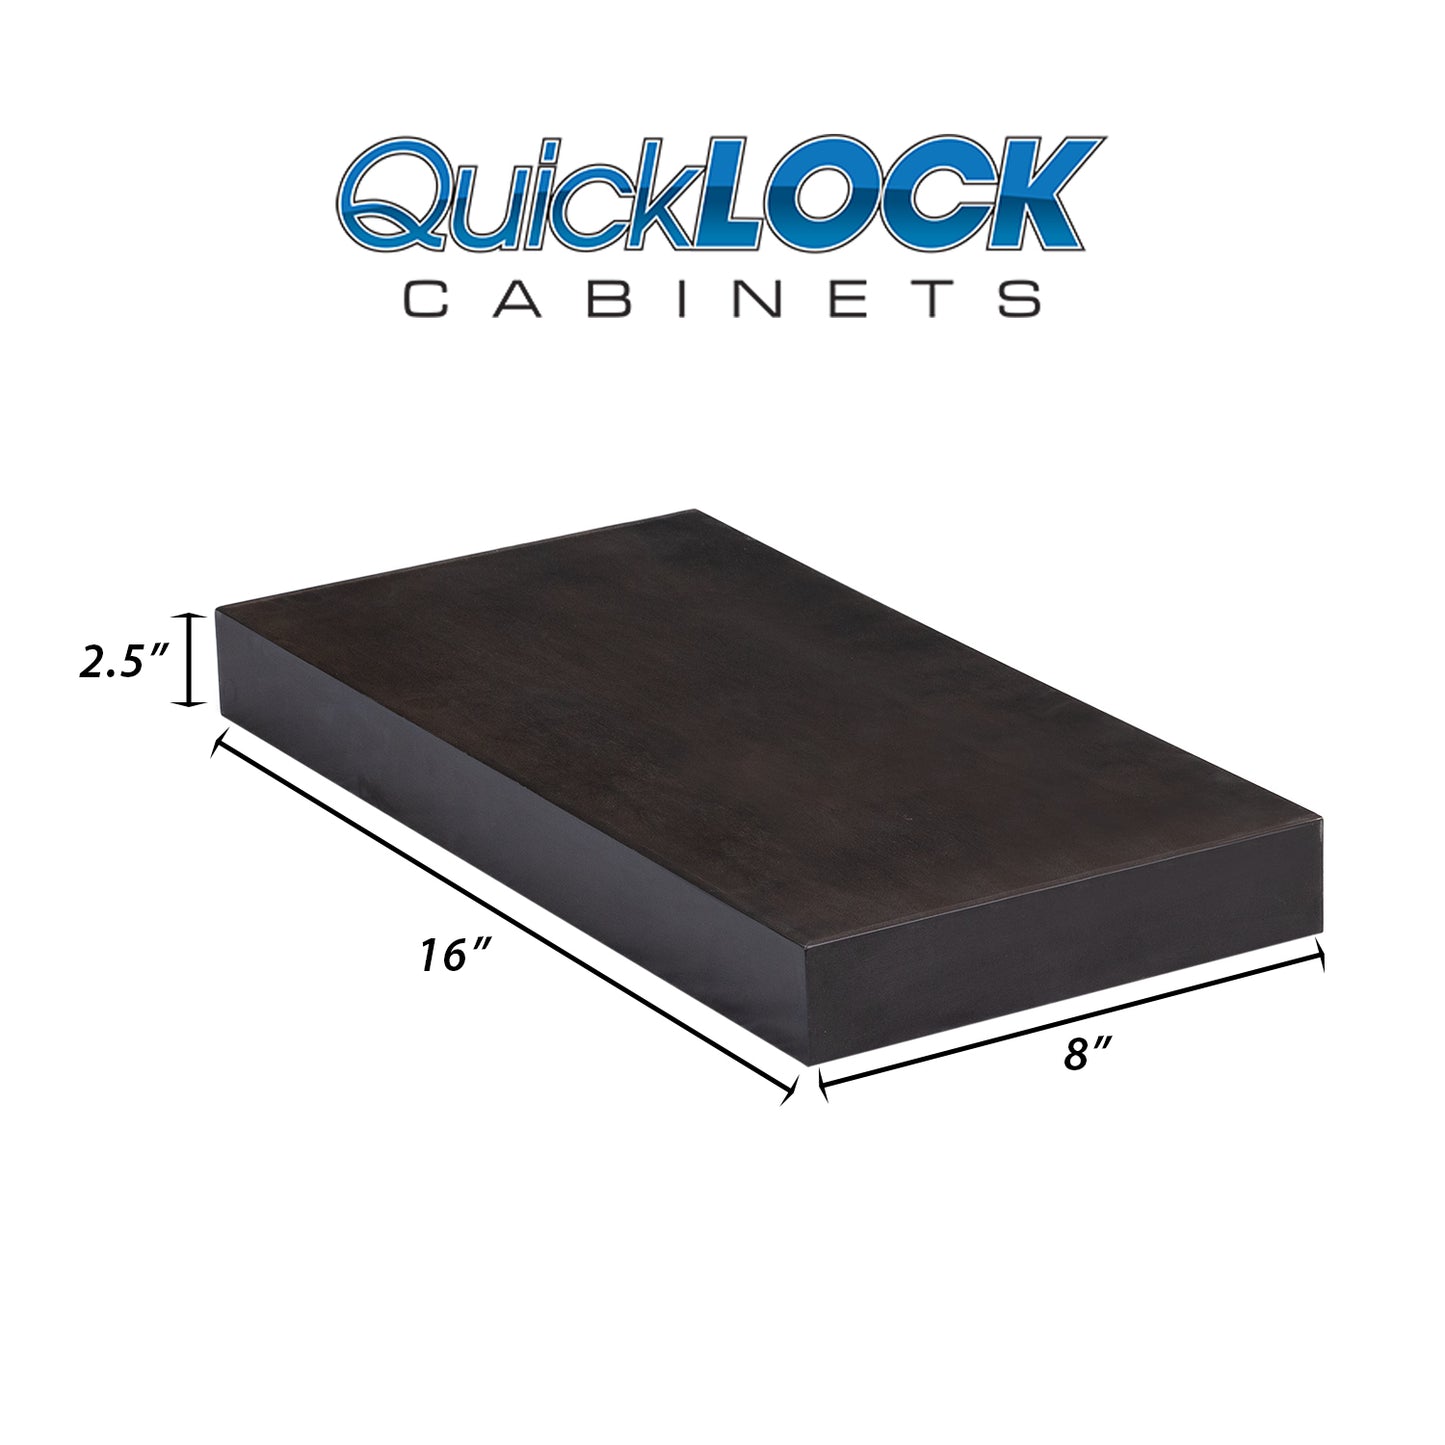 Quicklock Cabinets Floating Shelves | 2.5" Thick | Espresso Stain, 8" D x 16" W x 2.5" H | American Made | Hardwood Bracket | Complete Shelf Unit